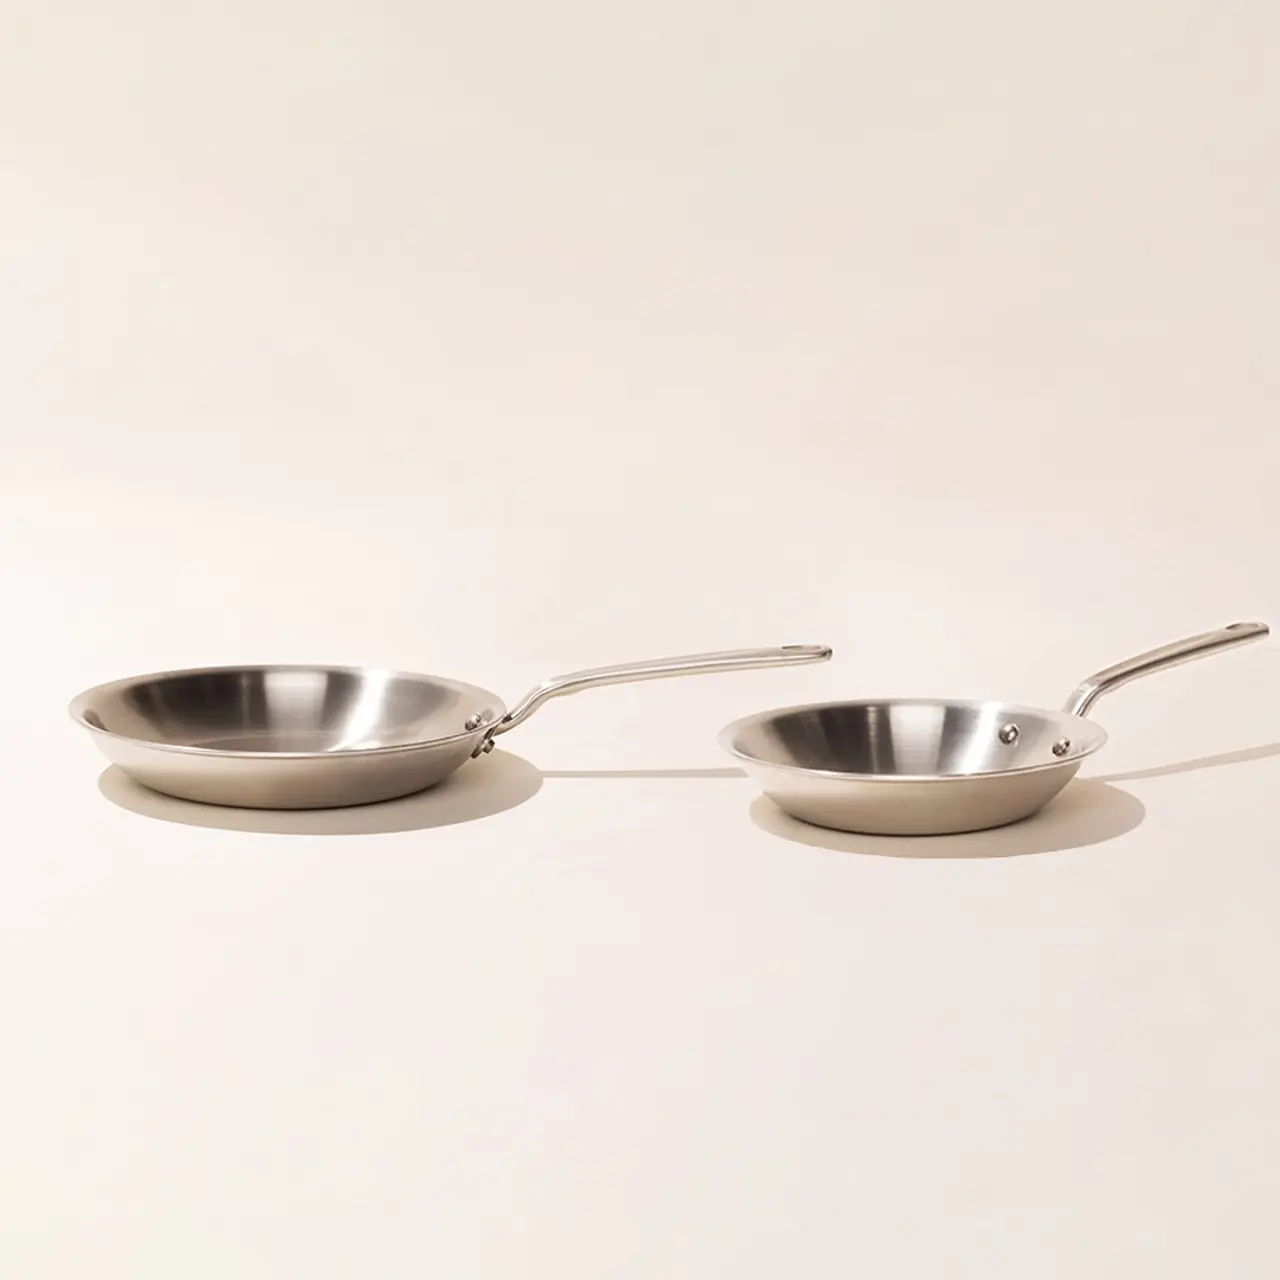 Two stainless steel frying pans with long handles are placed on a light-colored surface with a plain background.